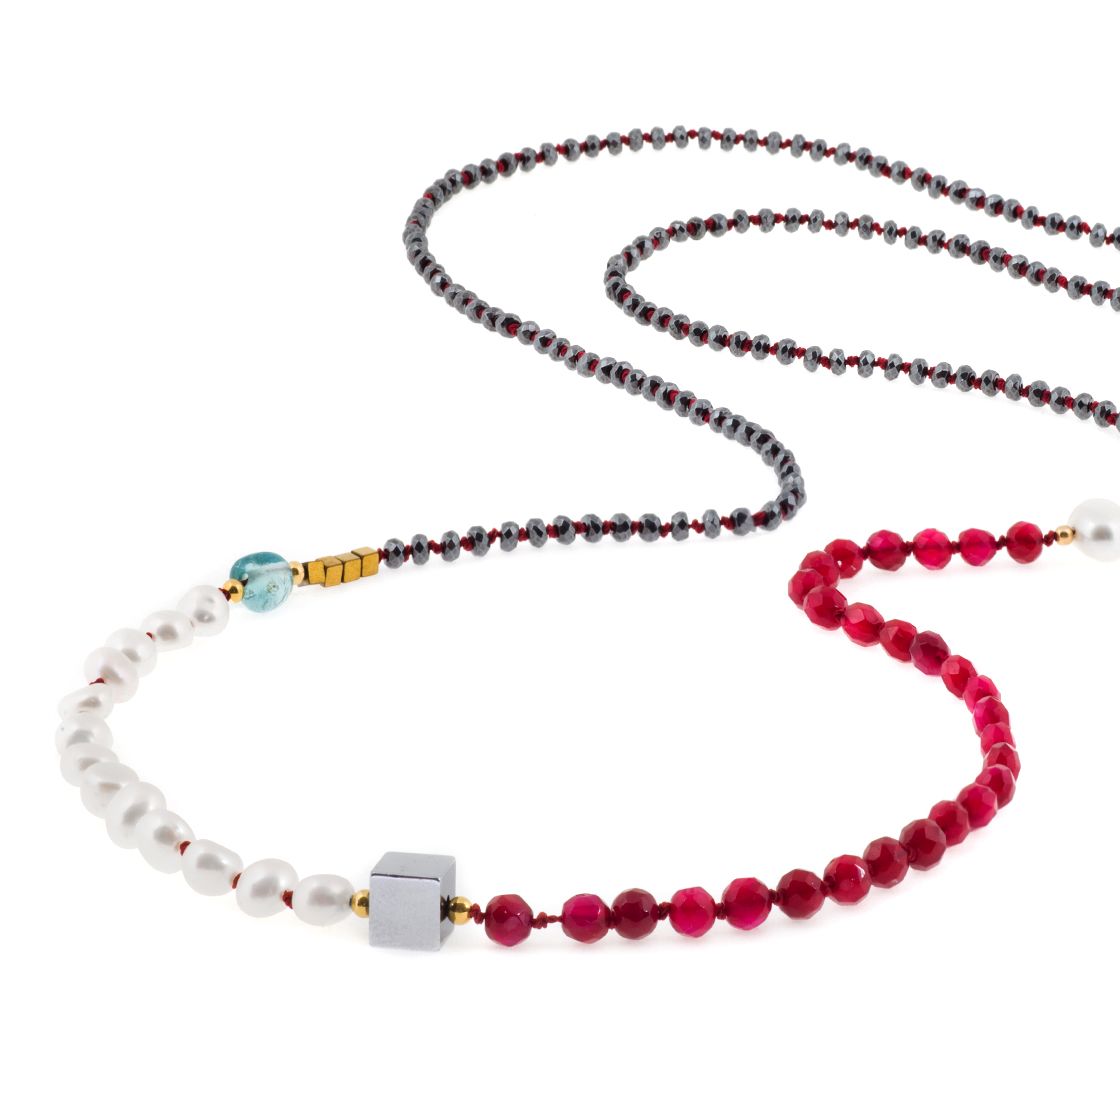 Long necklace with semiprecious stones and hand-knotted with thread.